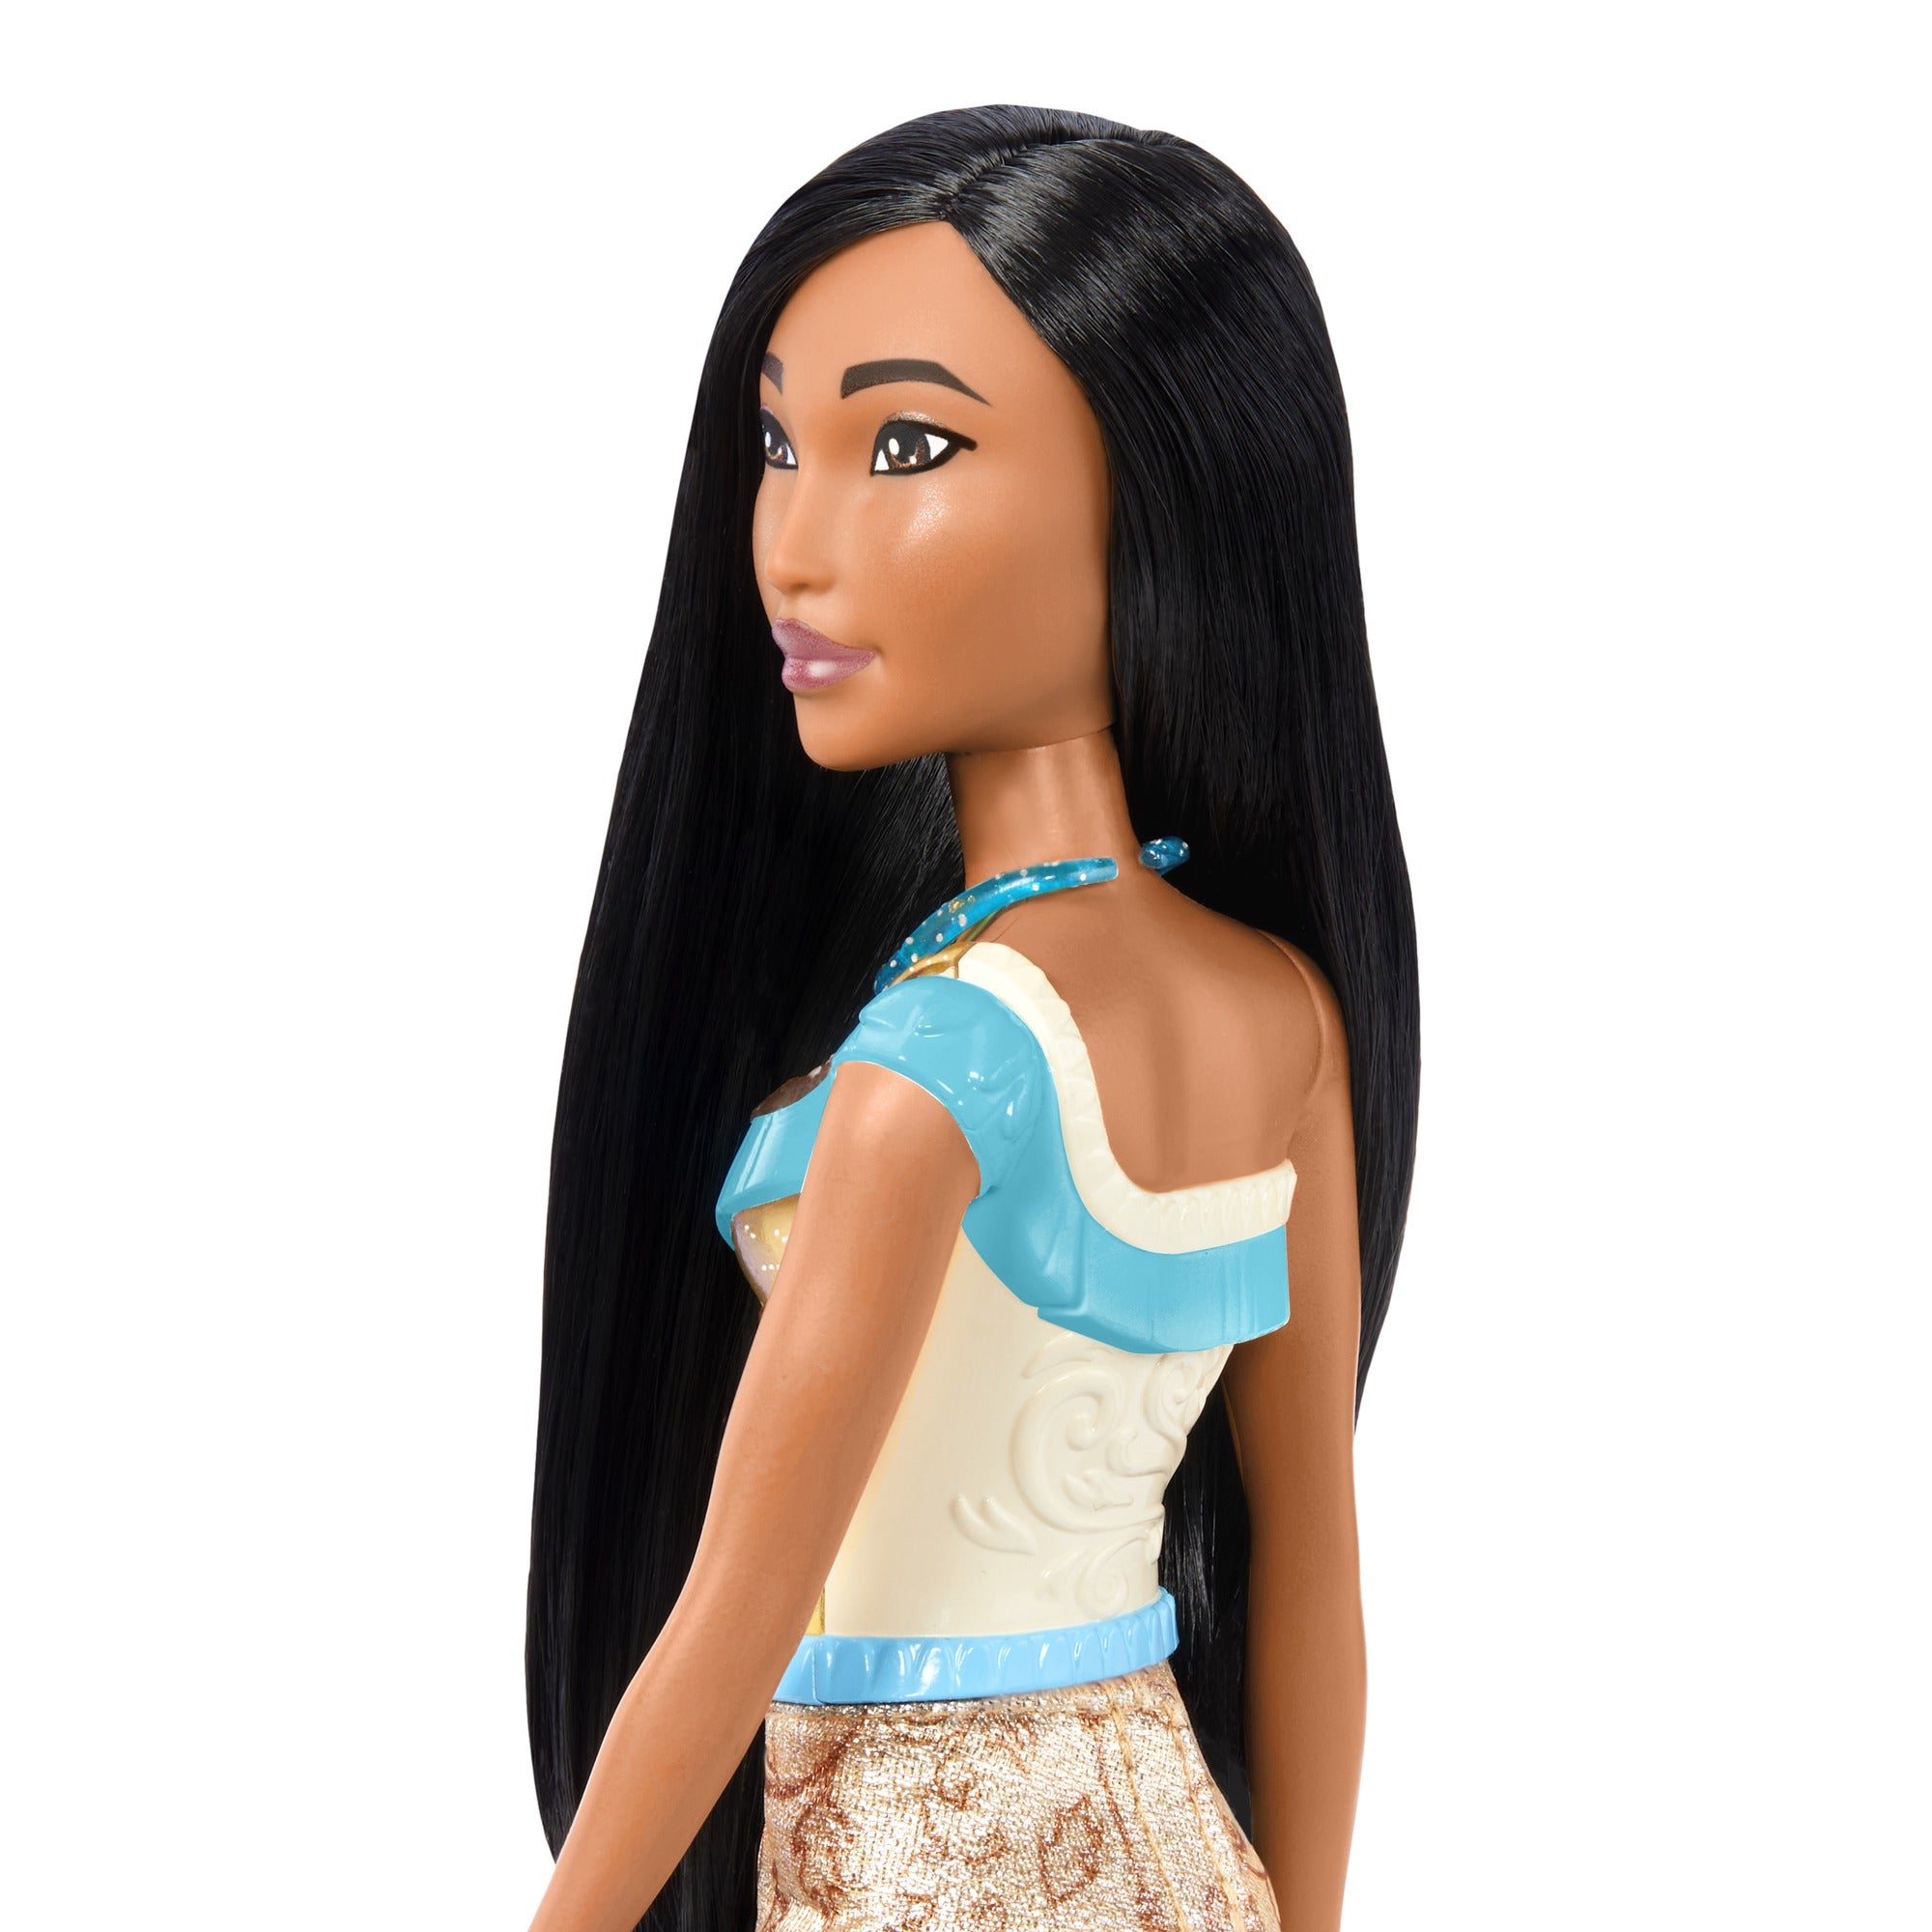 Disney Princess Pocahontas Posable Fashion Doll with Sparkling Clothing and Accessories for Kids Ages 3+